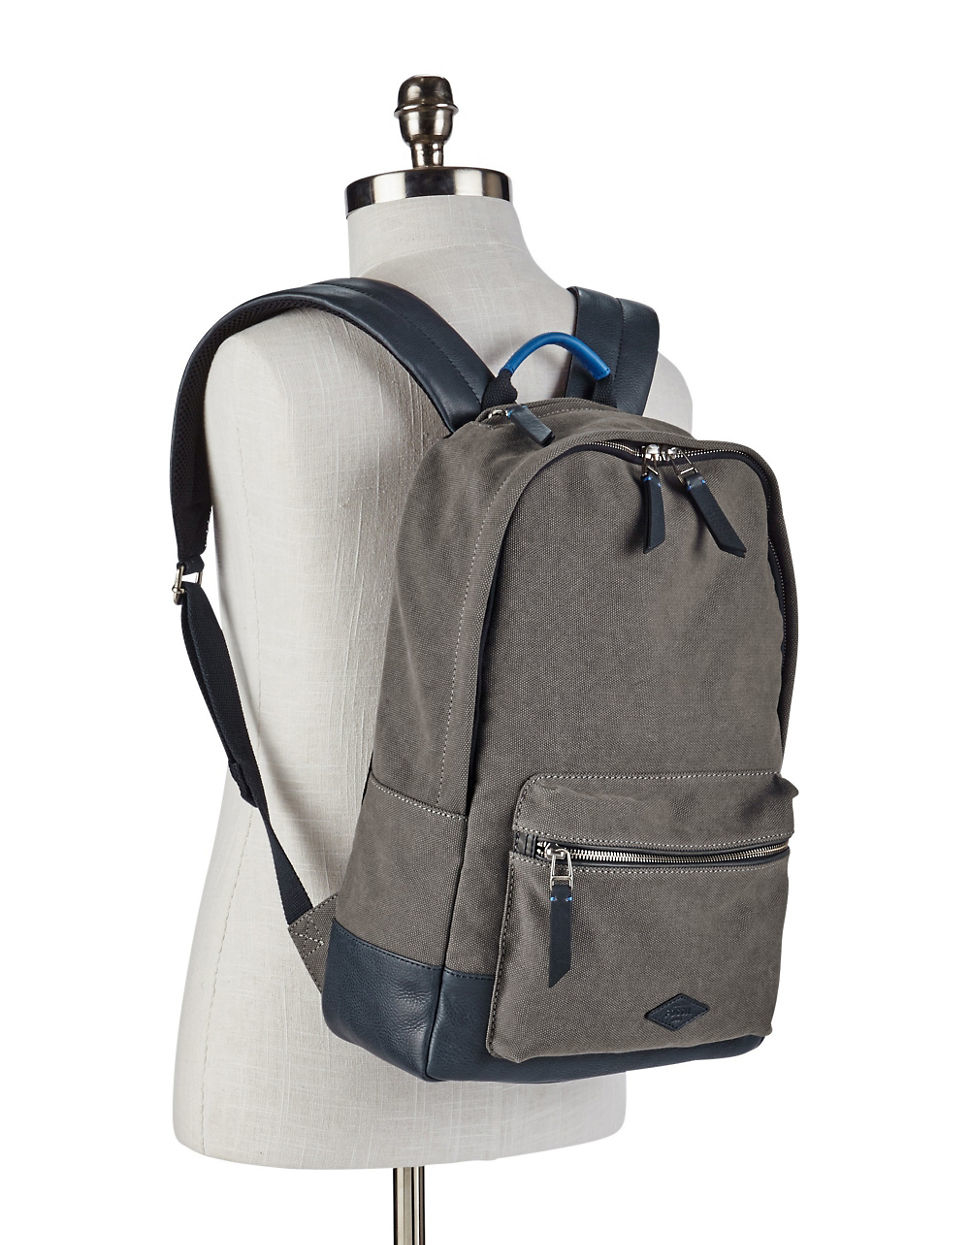 Fossil Estate Leather-trimmed Backpack in Grey (Gray) for Men - Lyst